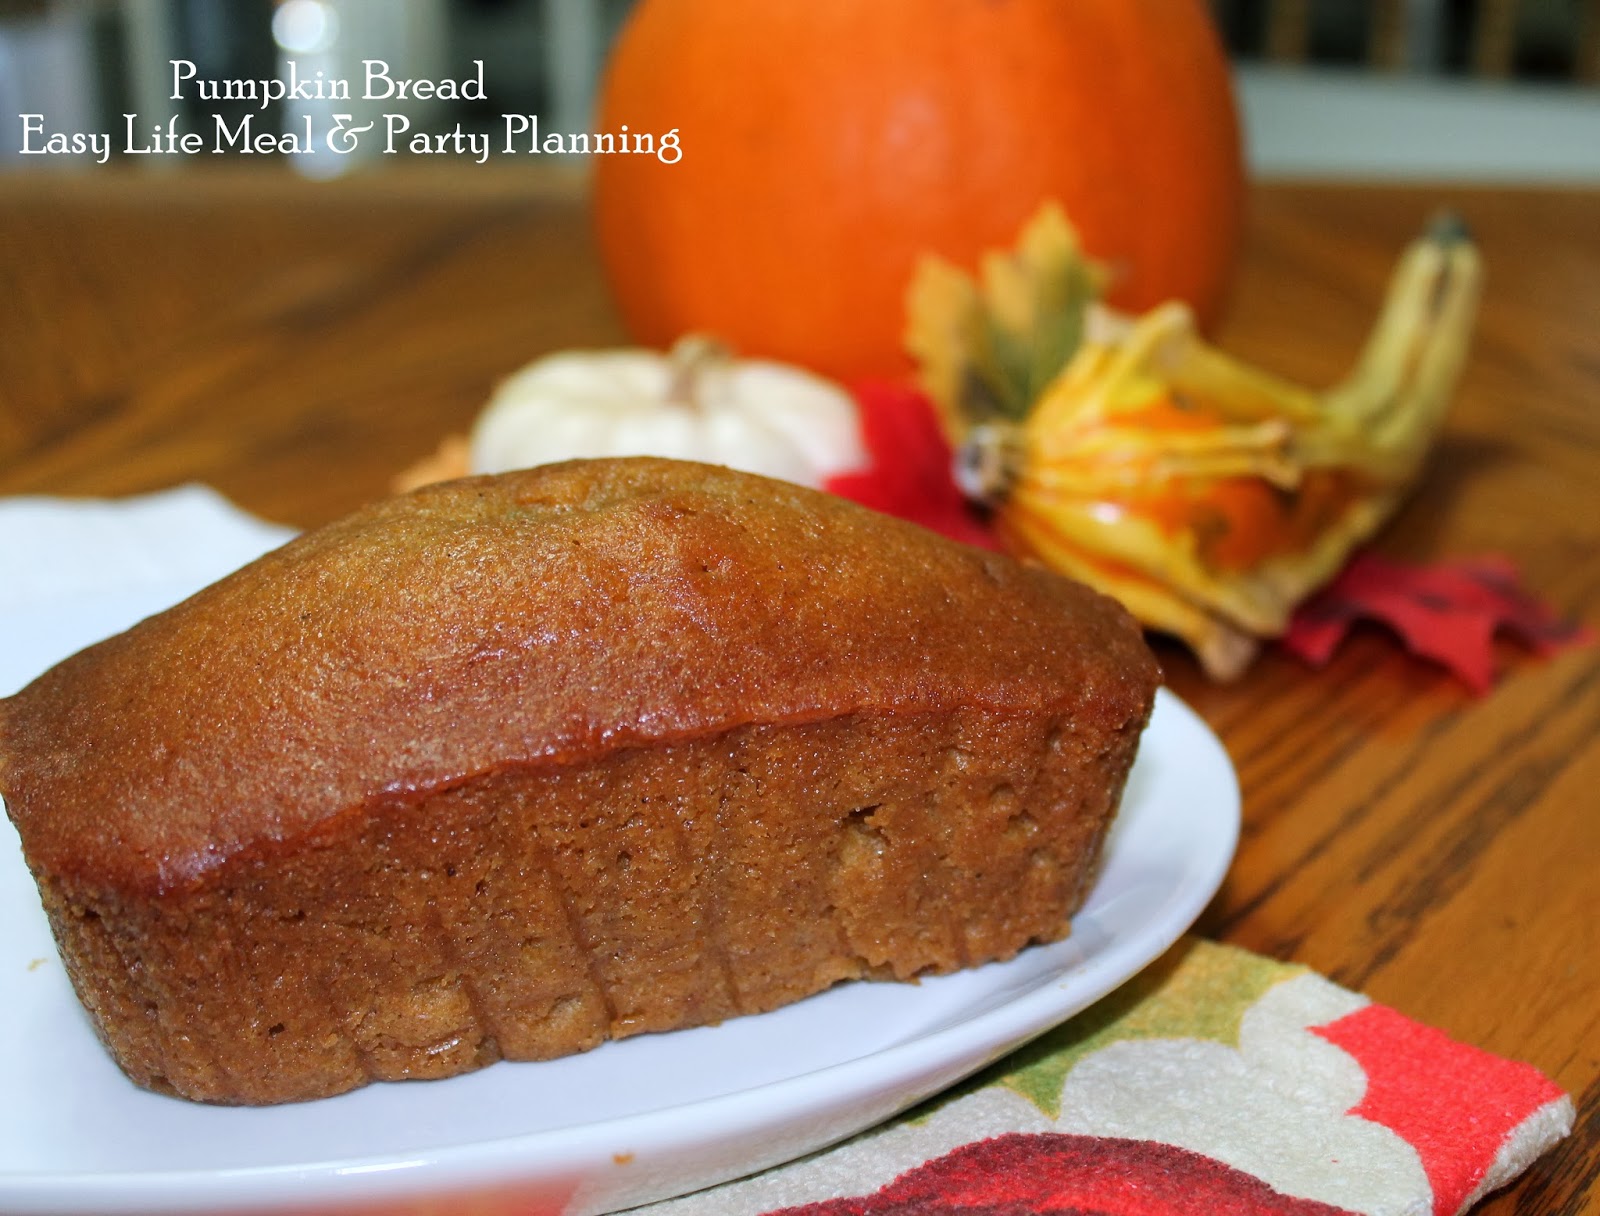 The Very Best Pumpkin Bread: Easy Life Meal & Party Planning